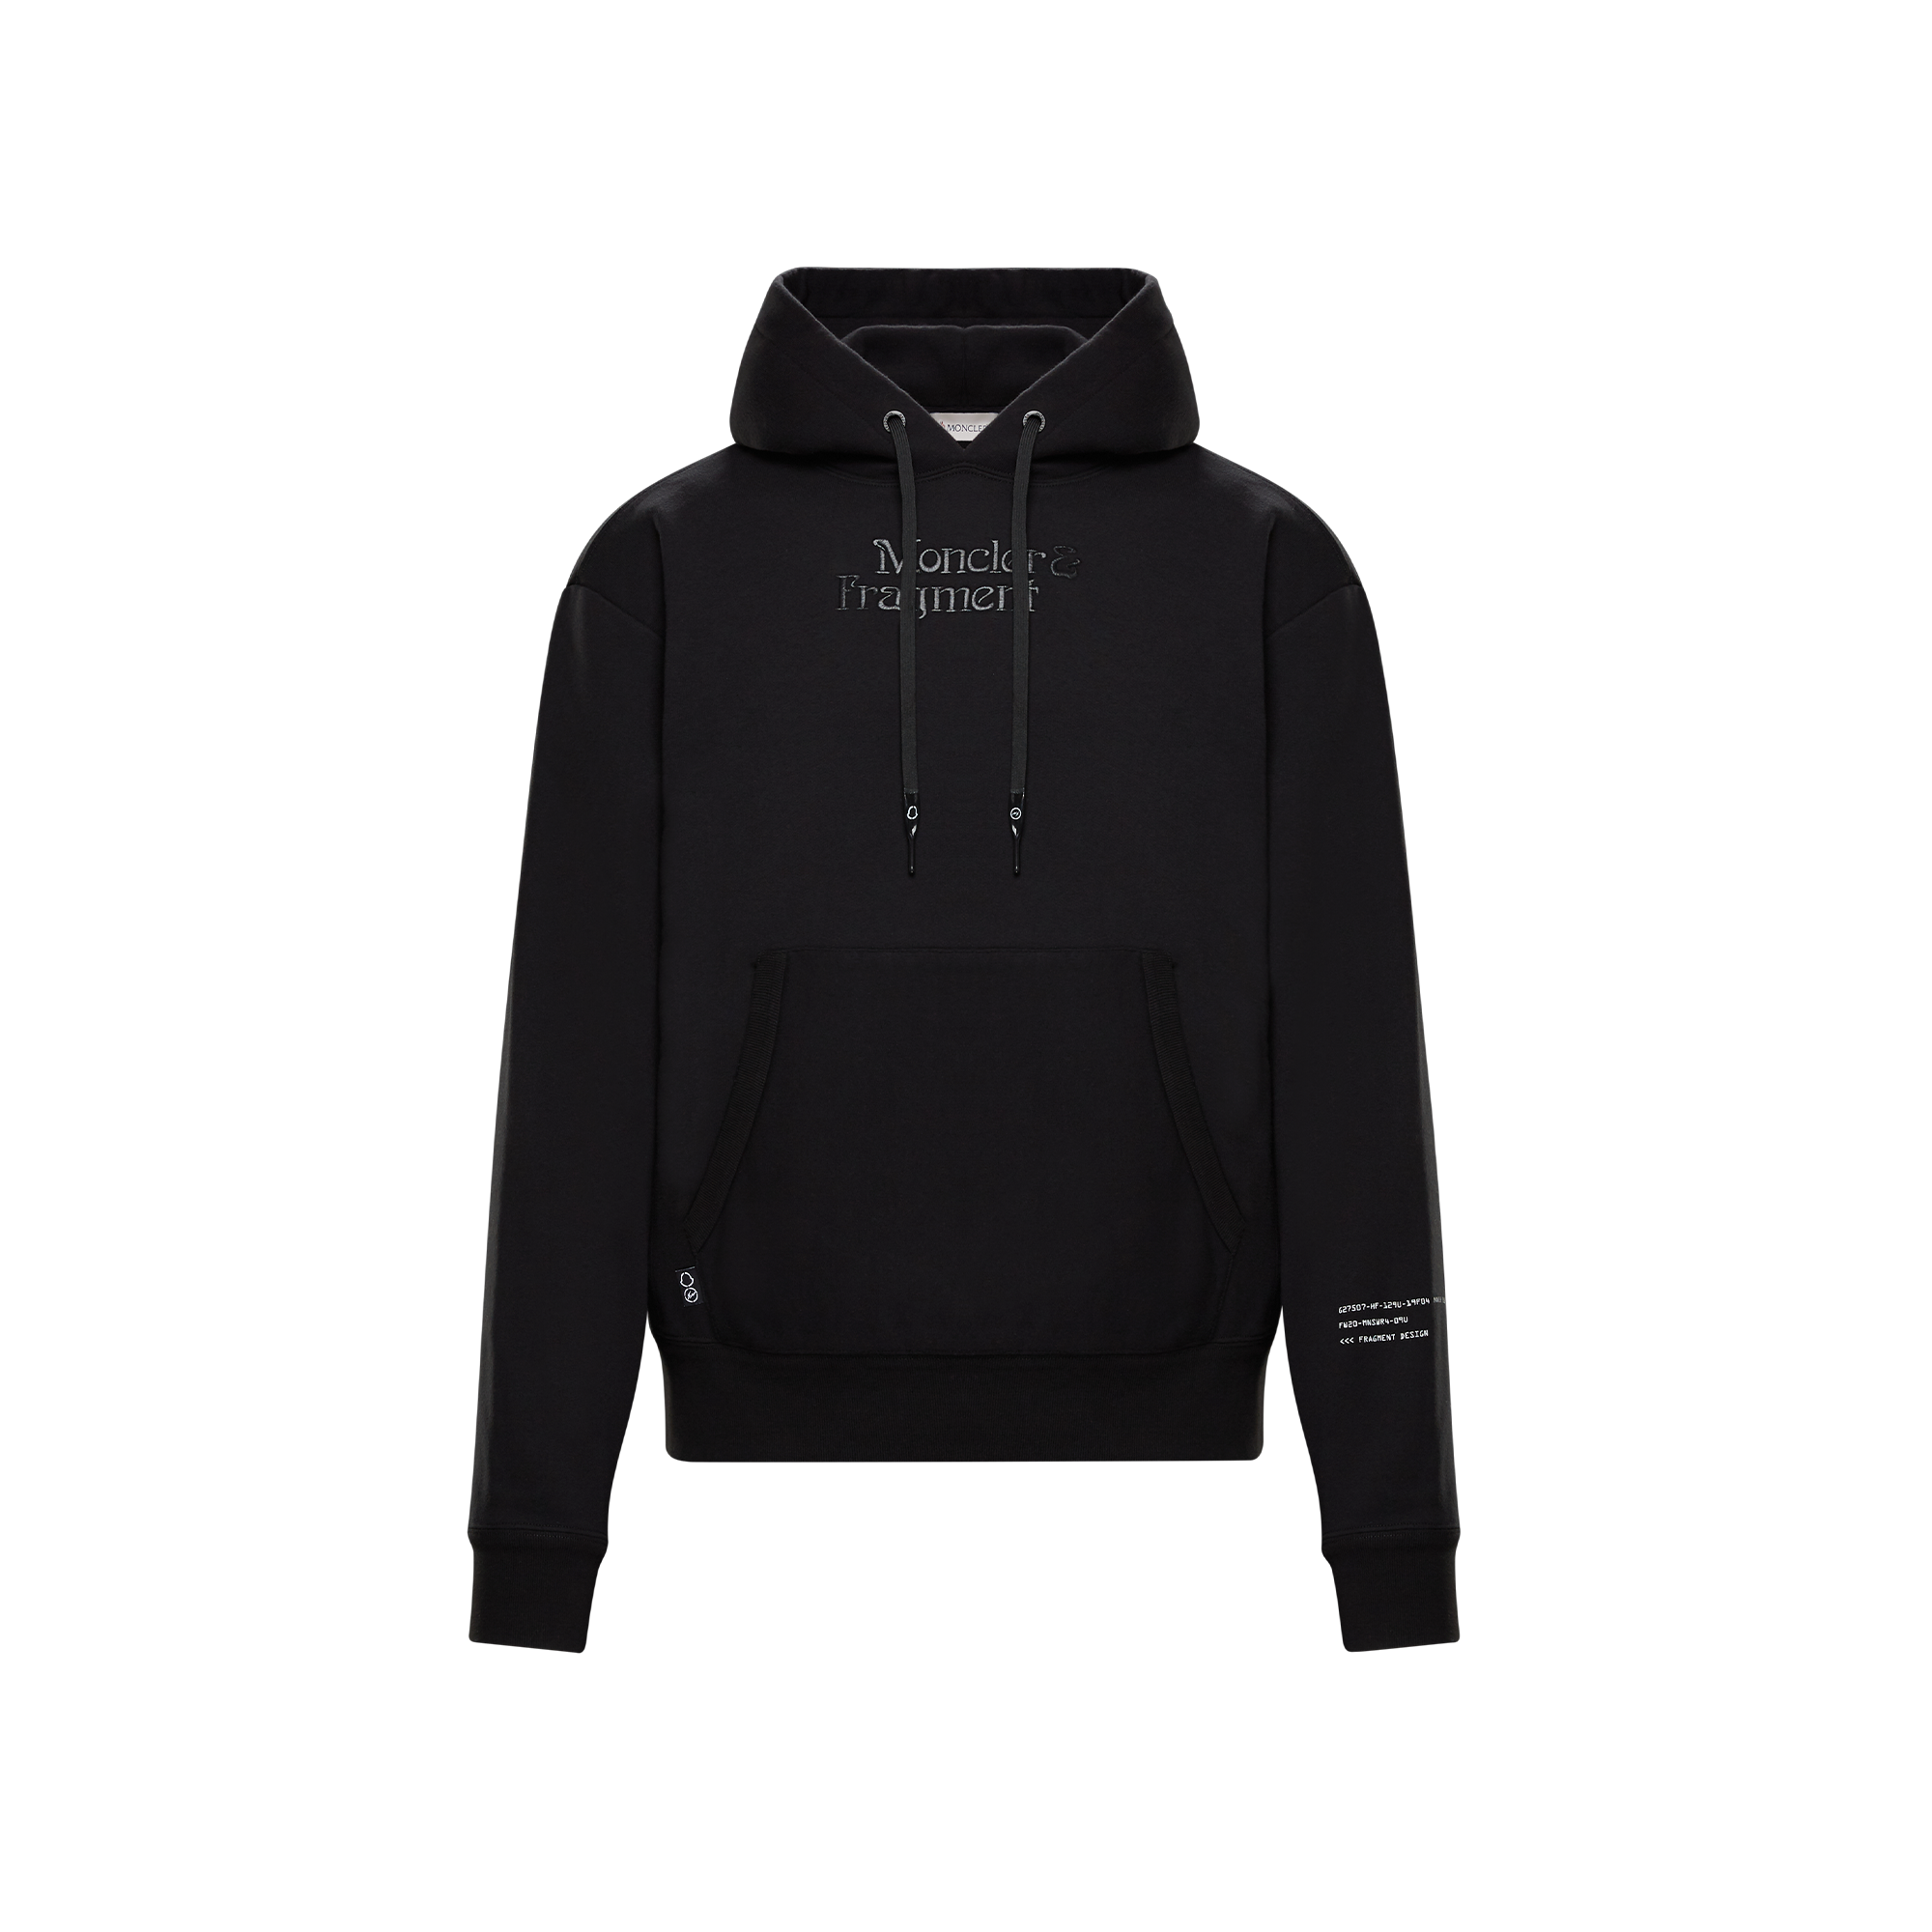 Embroidered Moncler x Fragment Hoodie Moncler Tops Sweats & Hoodies Black